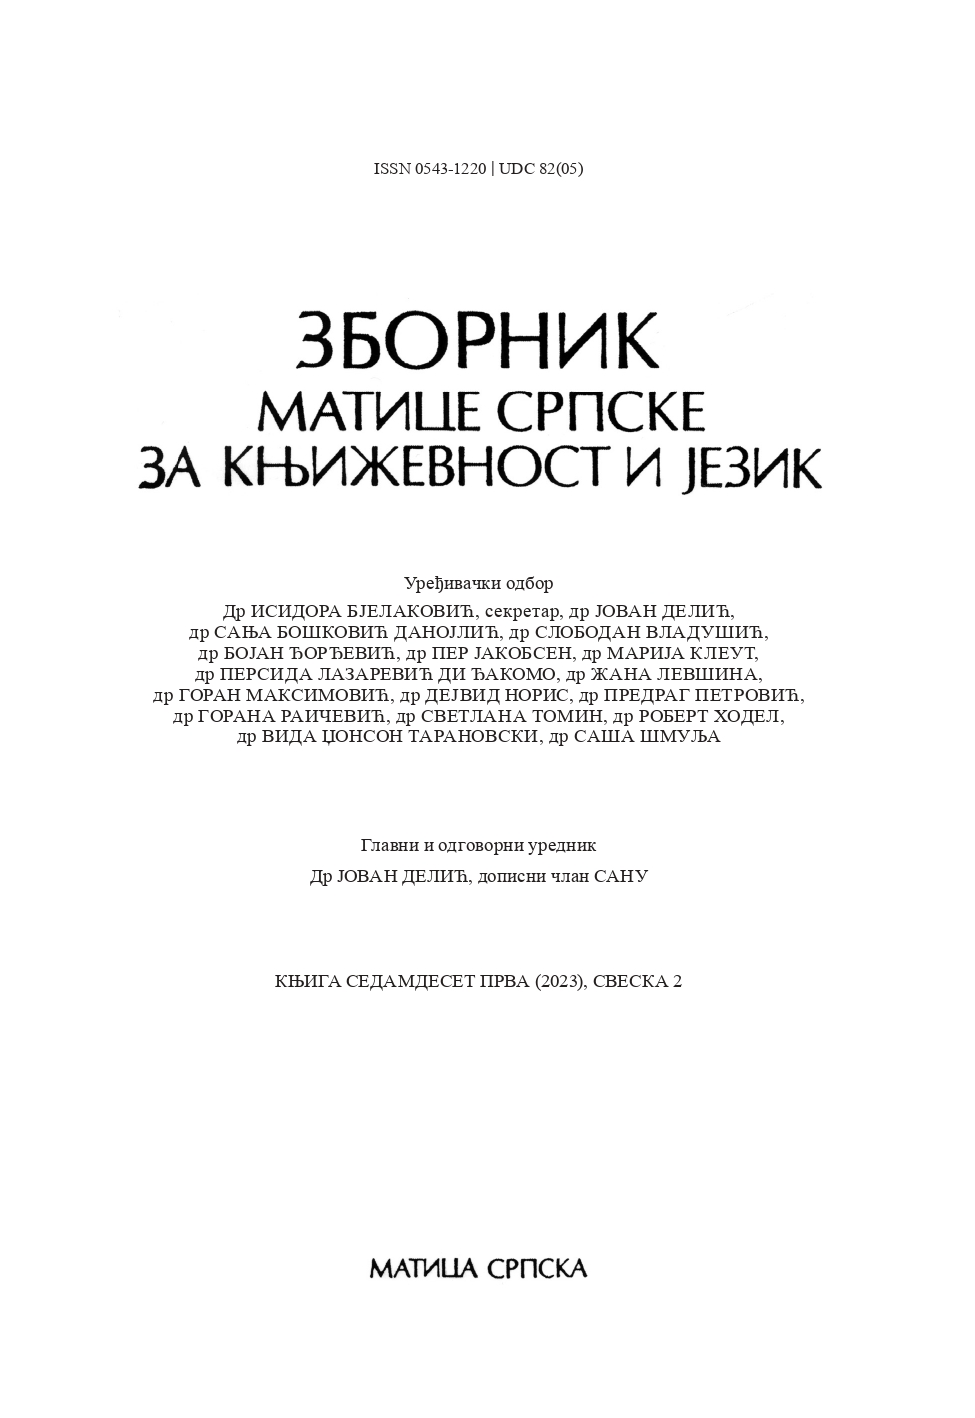 THE TRANSPOSITION OF THE SIMULTANEOUS NARRATION IN A LITERARY TEXT TO THE PAST NARRATION: THE DAMNED YARD VERSUS ONE OF ITS ENGLISH TRANSLATIONS Cover Image